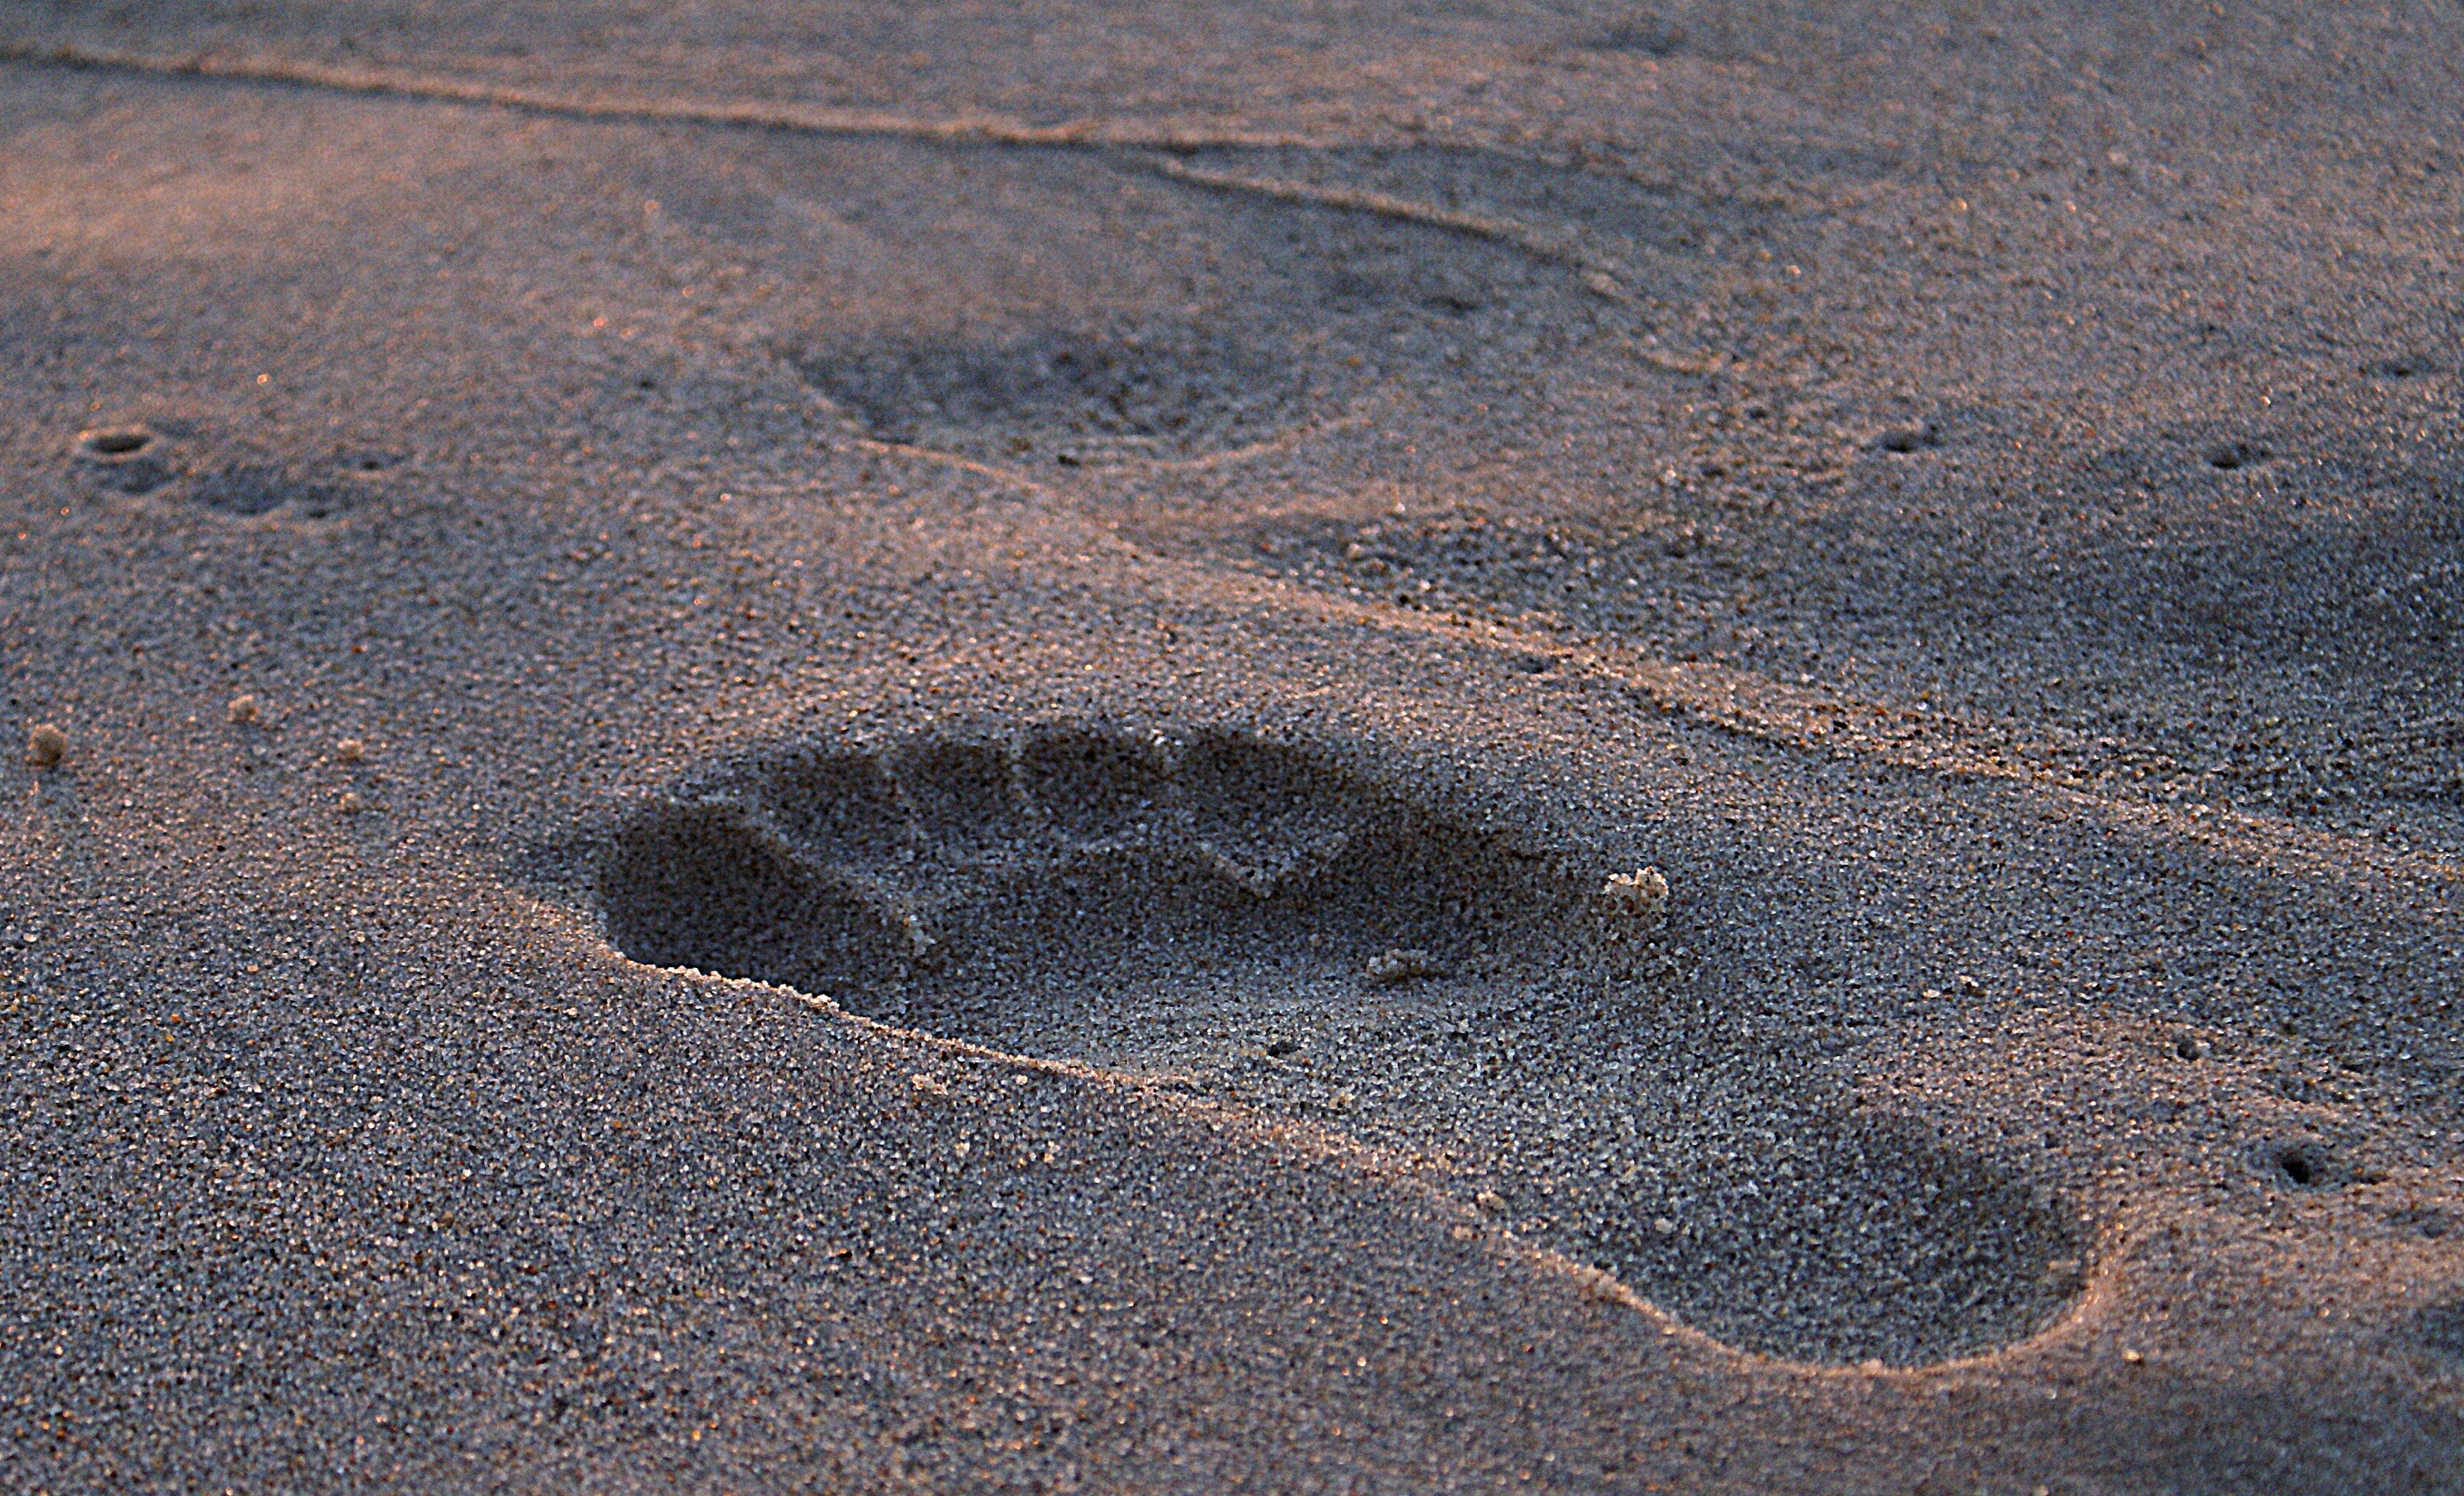 right foot print on a sand